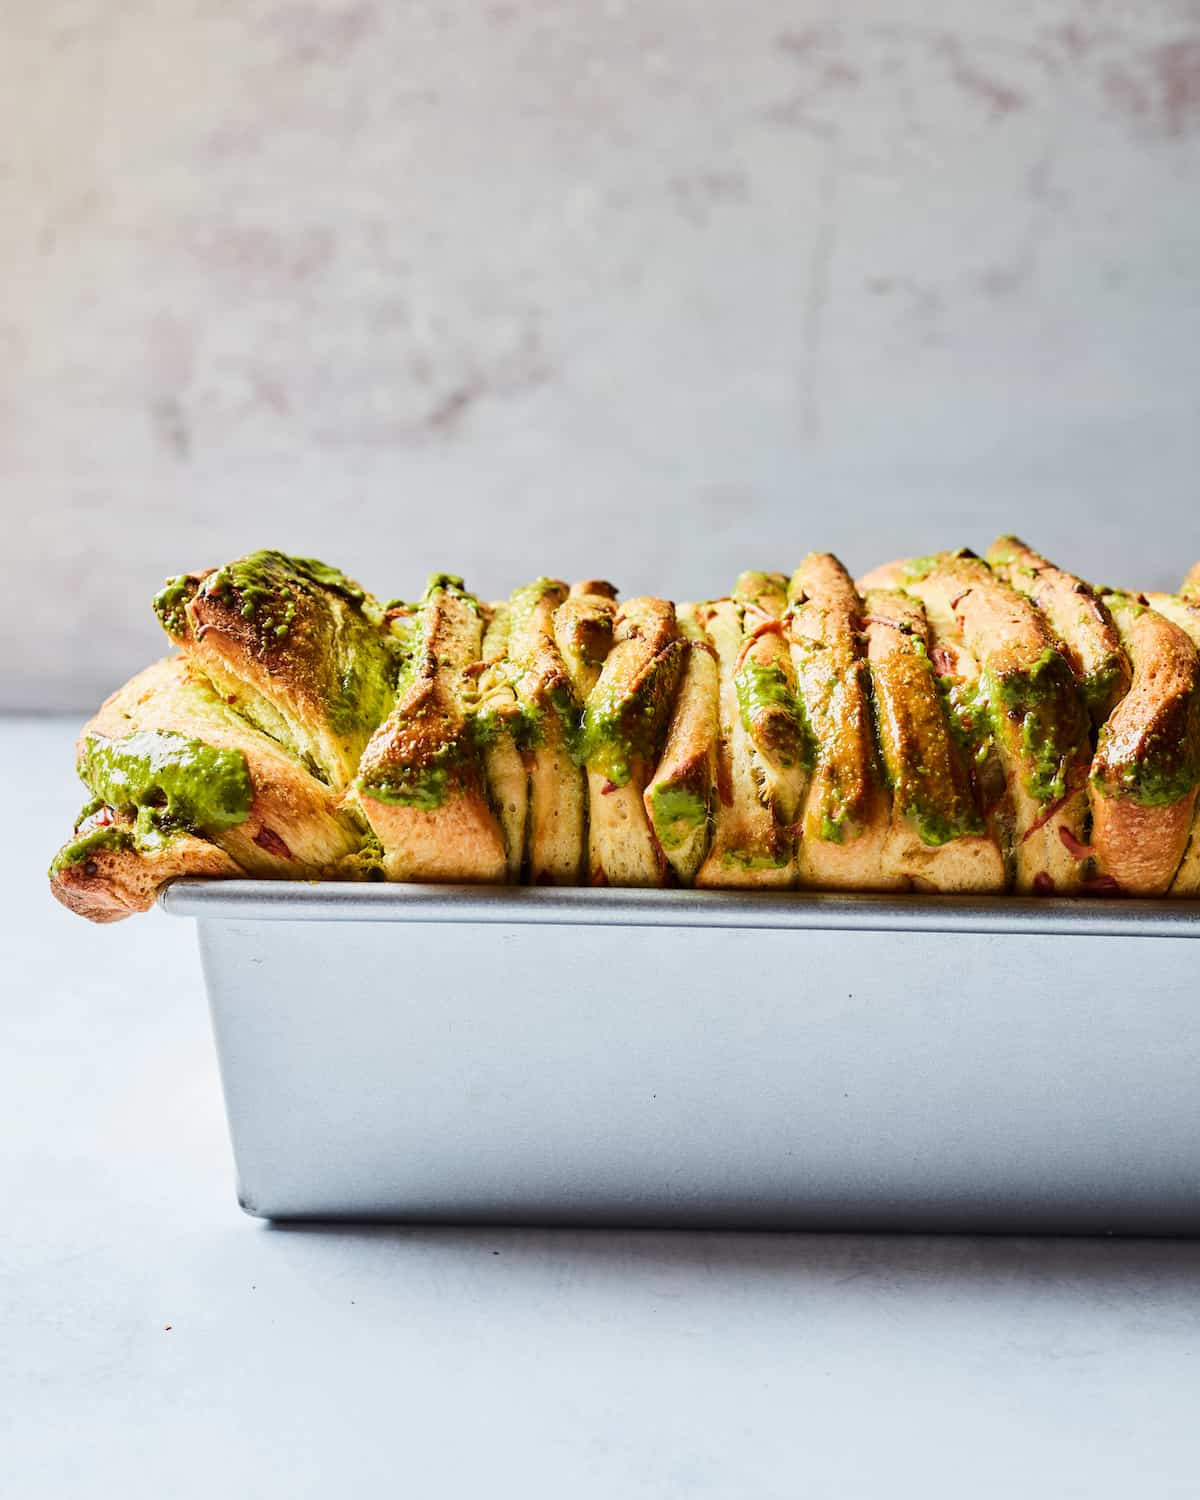 Pesto pull apart bread in a metal loaf pan on a white countertop with a white marbled background